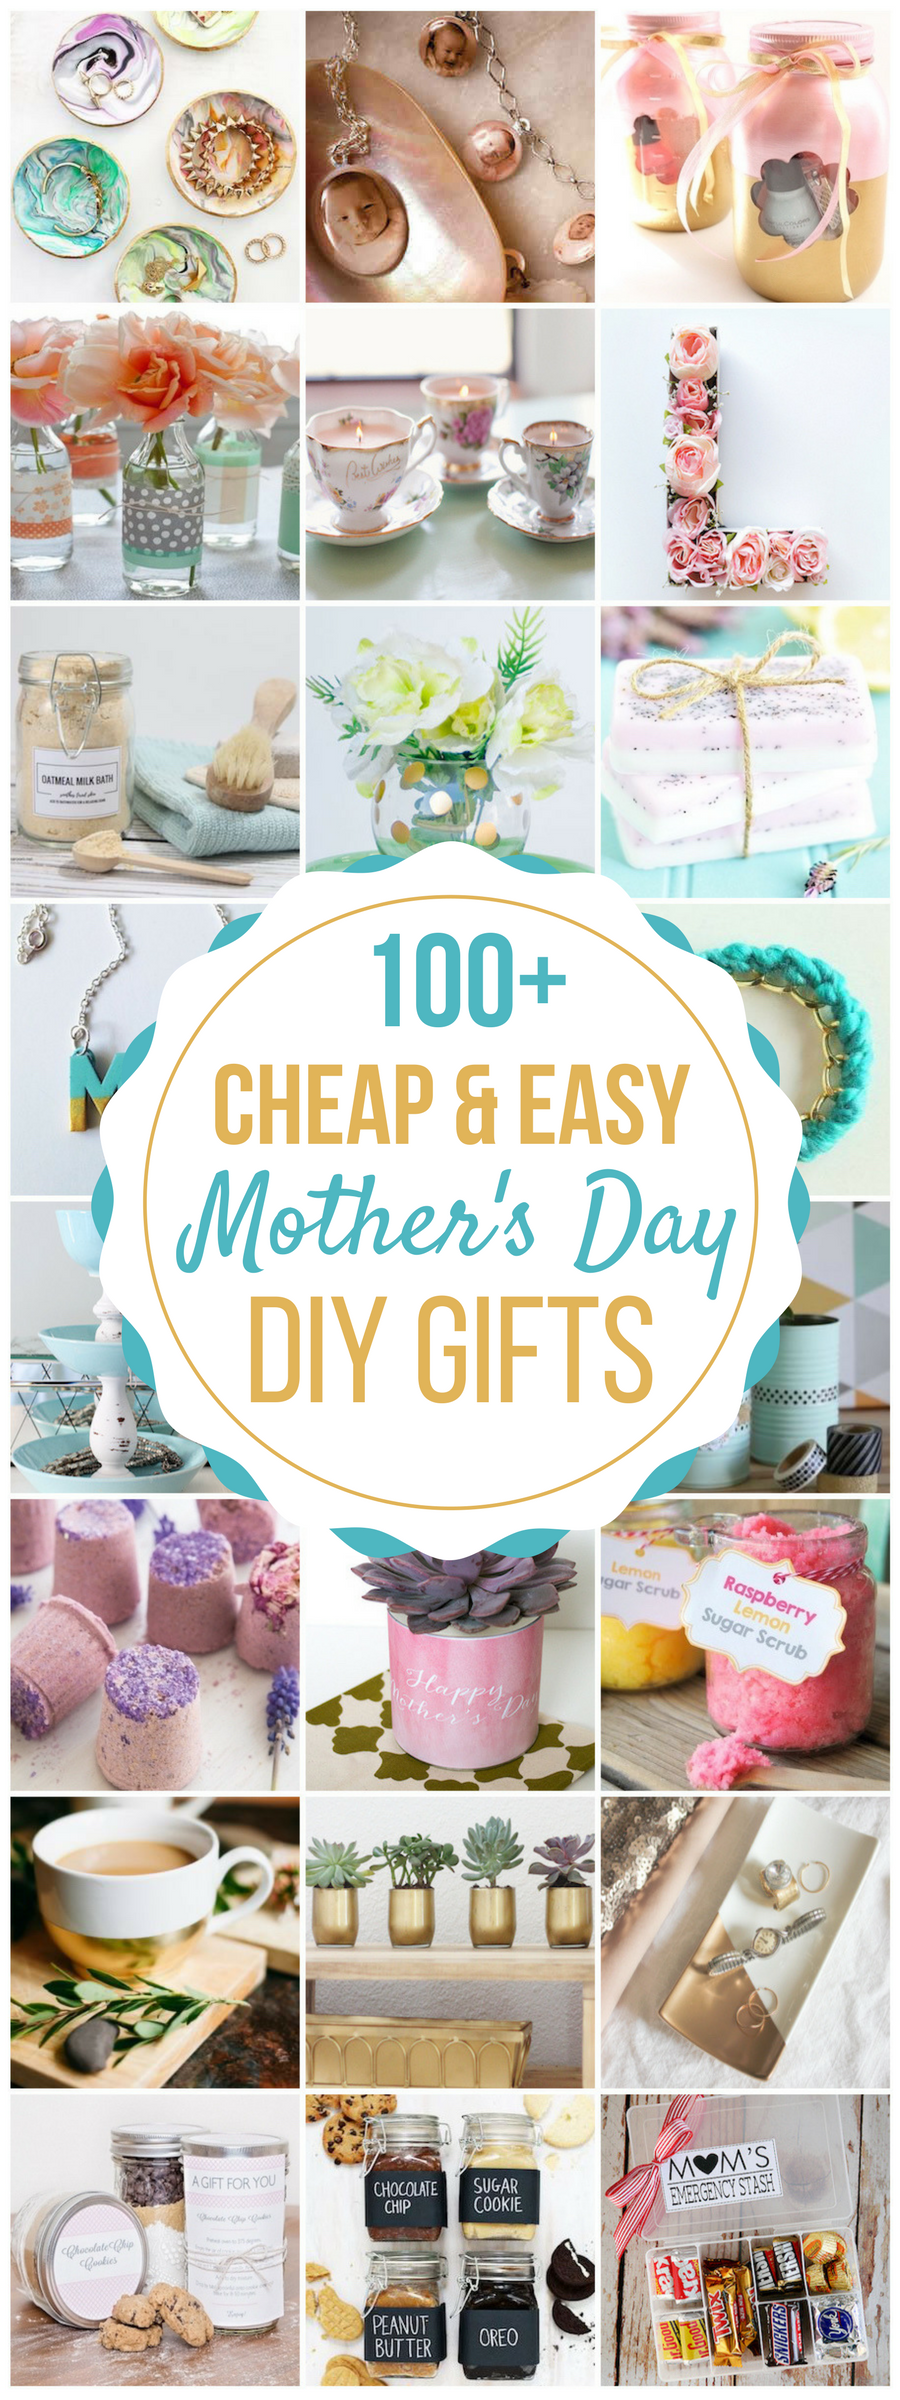 100 Cheap & Easy DIY Mother's Day Gifts Prudent Penny Pincher